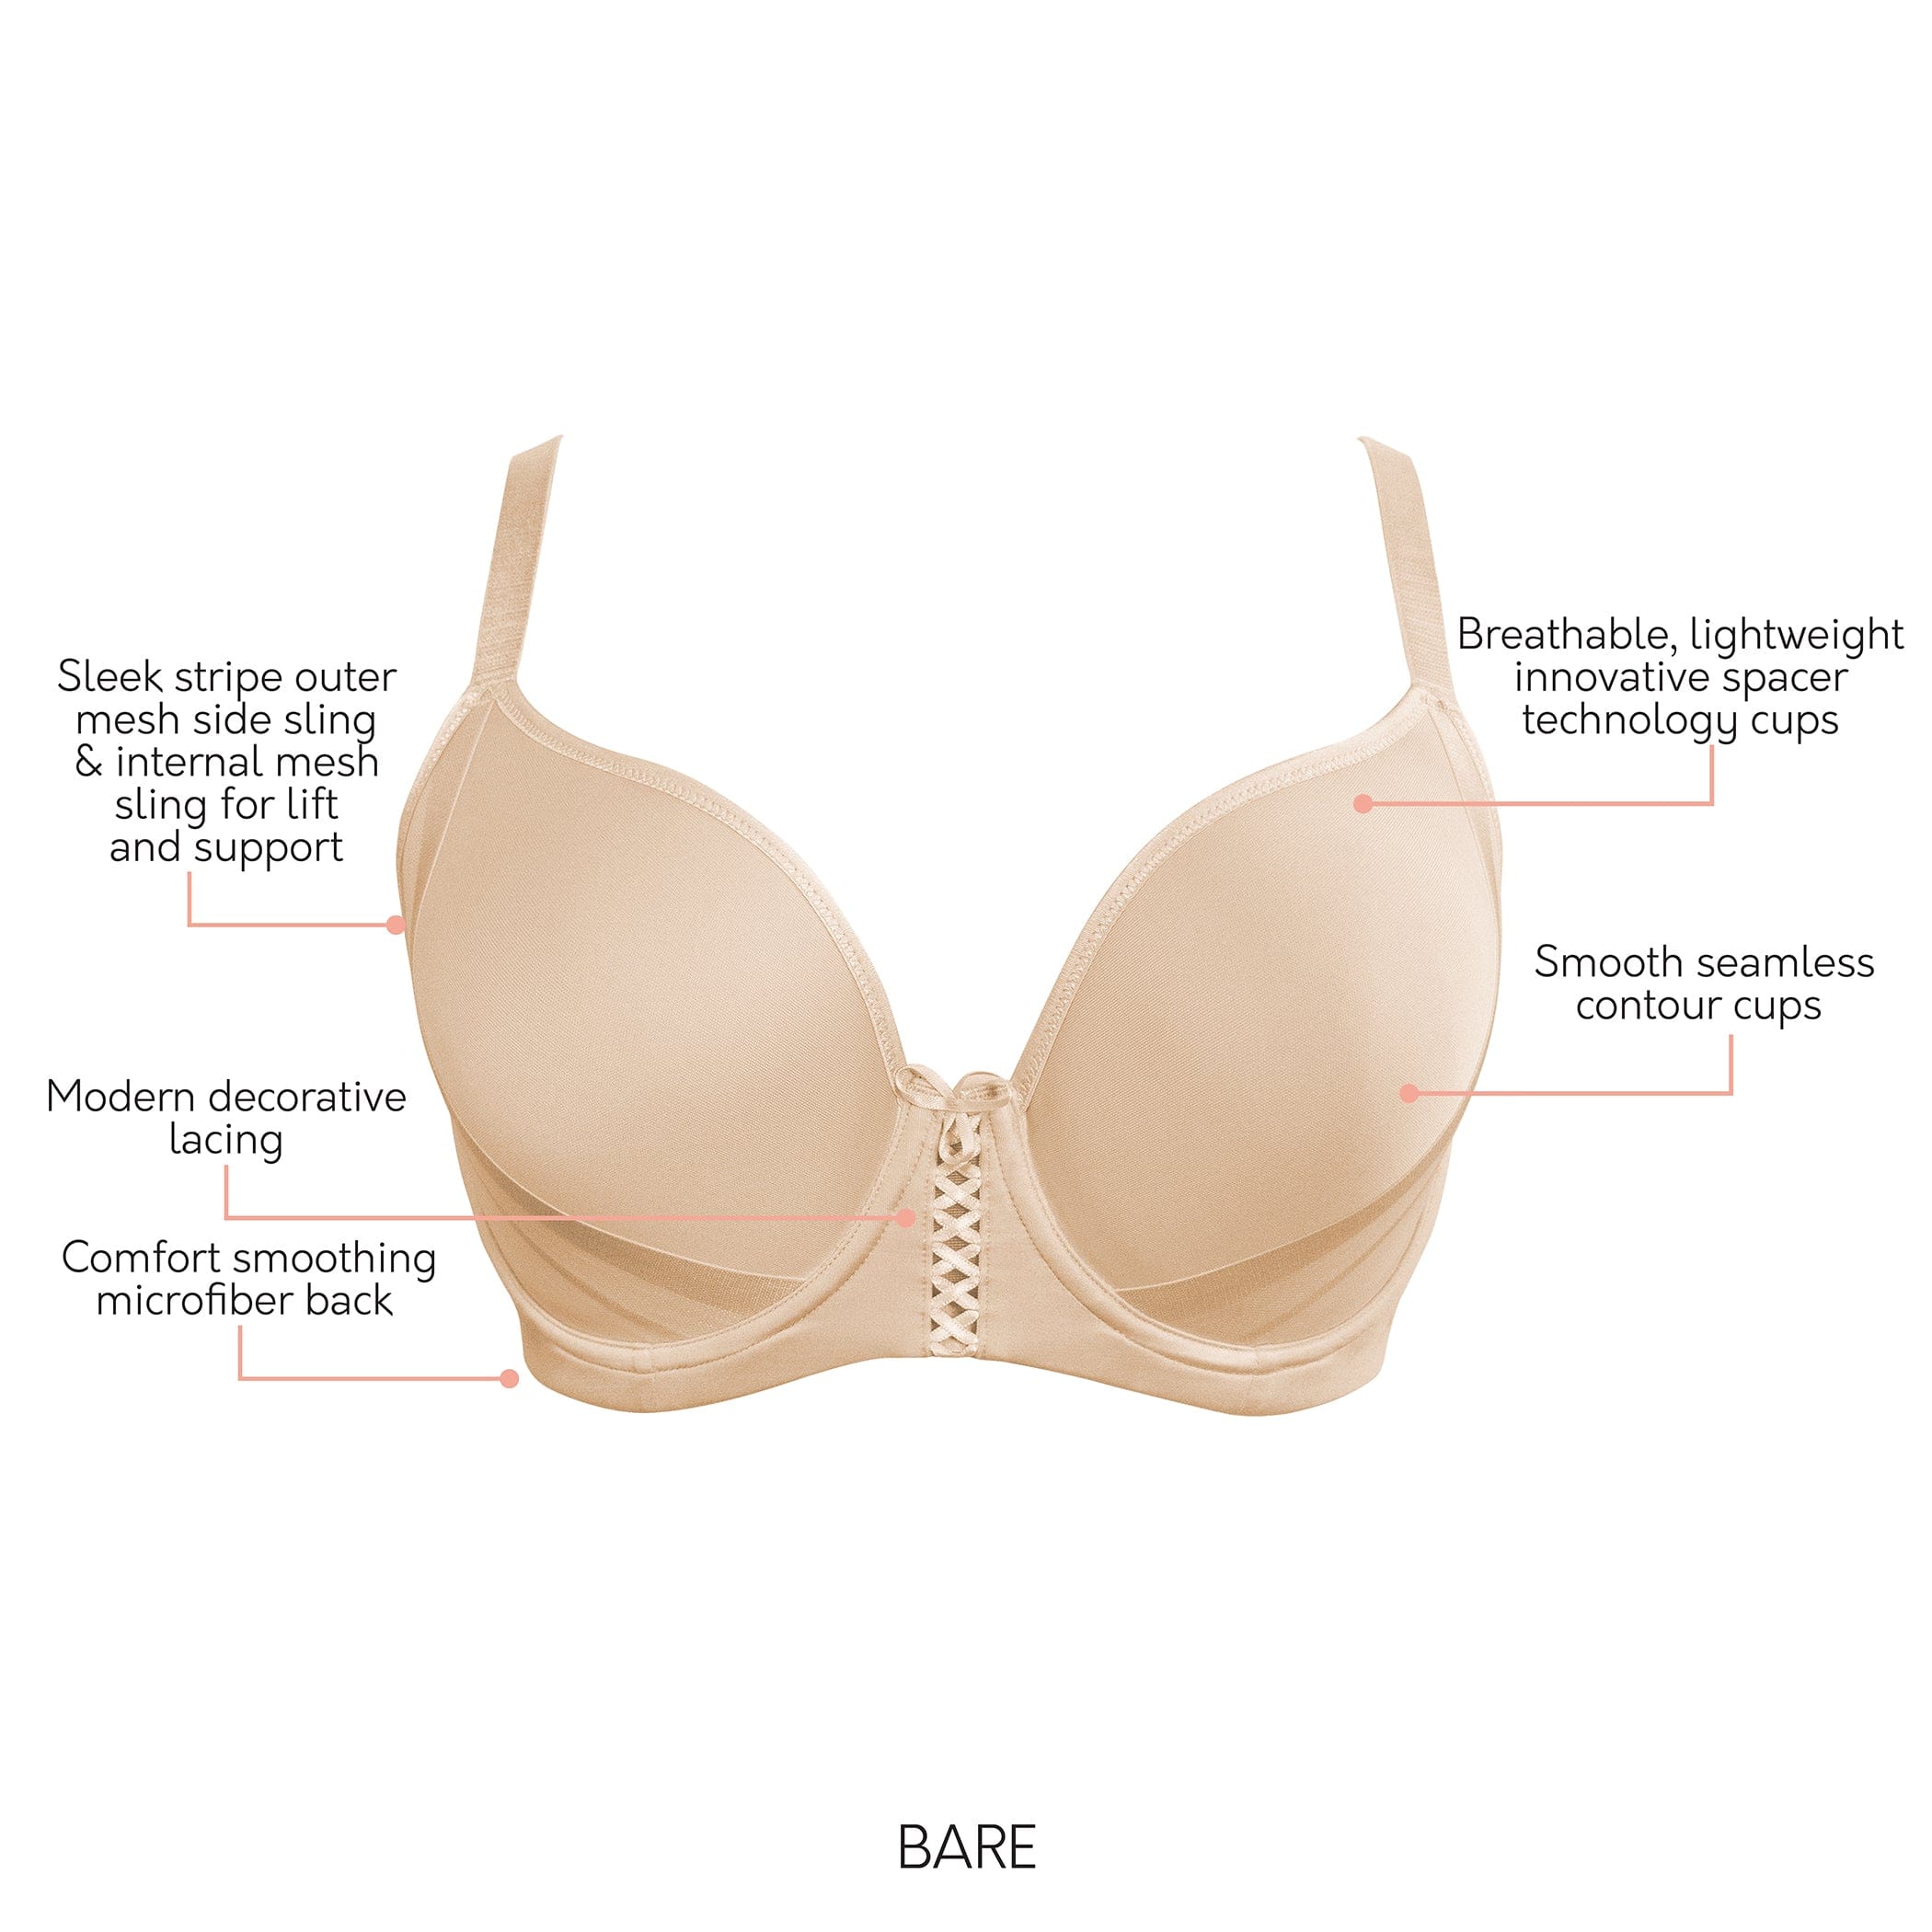 The Technology of the Spacer Bra